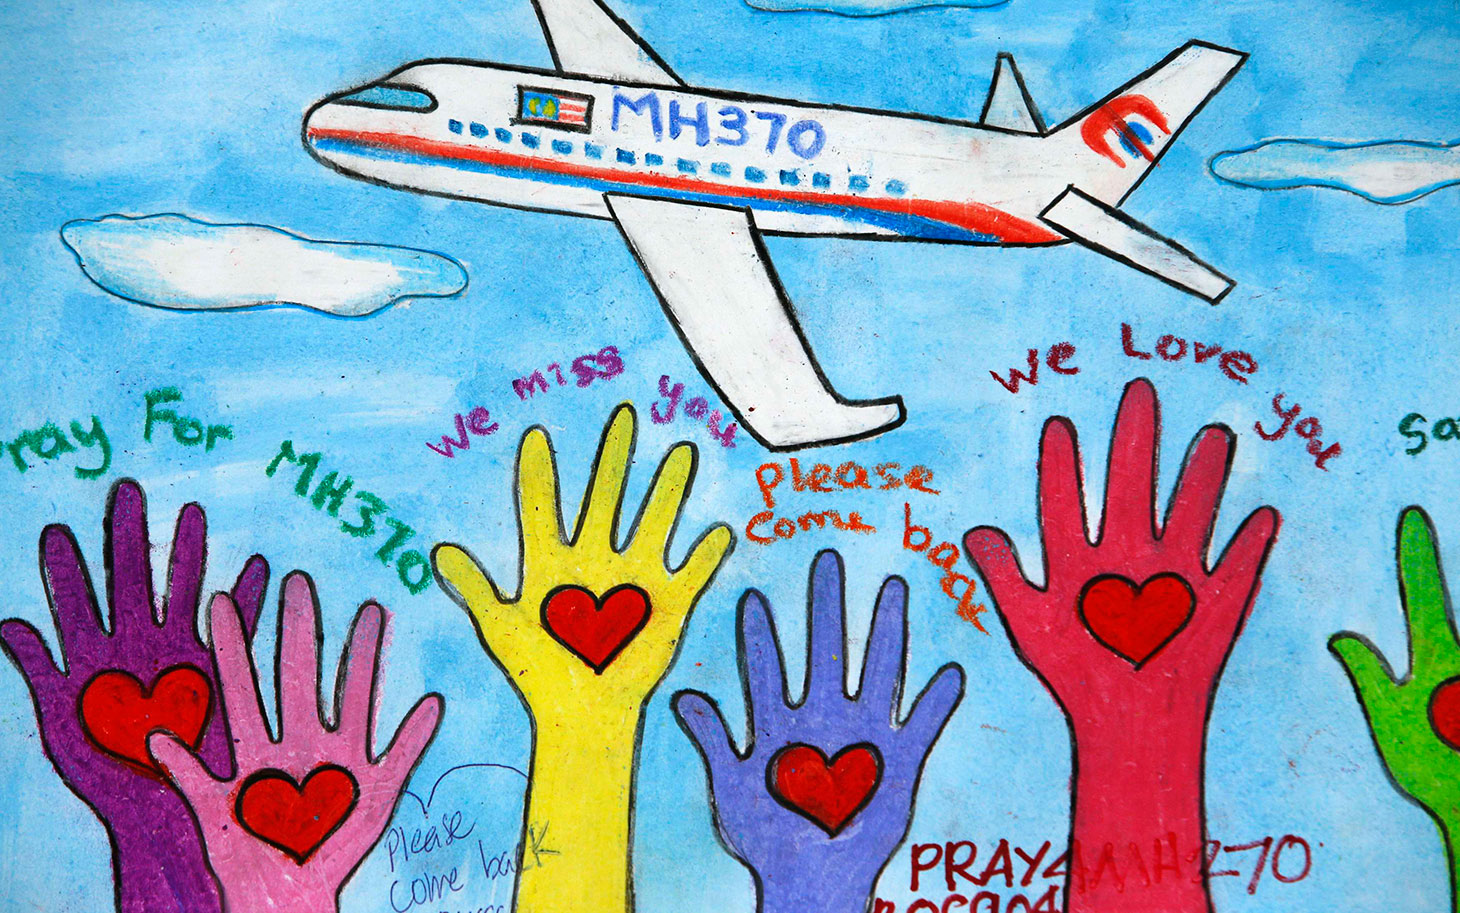 An artwork conveying well-wishes for the passengers and crew of the missing Malaysia Airlines Flight MH370 is seen at a viewing gallery in Kuala Lumpur International Airport March 19, 2014. REUTERS/Edgar Su (MALAYSIA - Tags: DISASTER TRANSPORT)